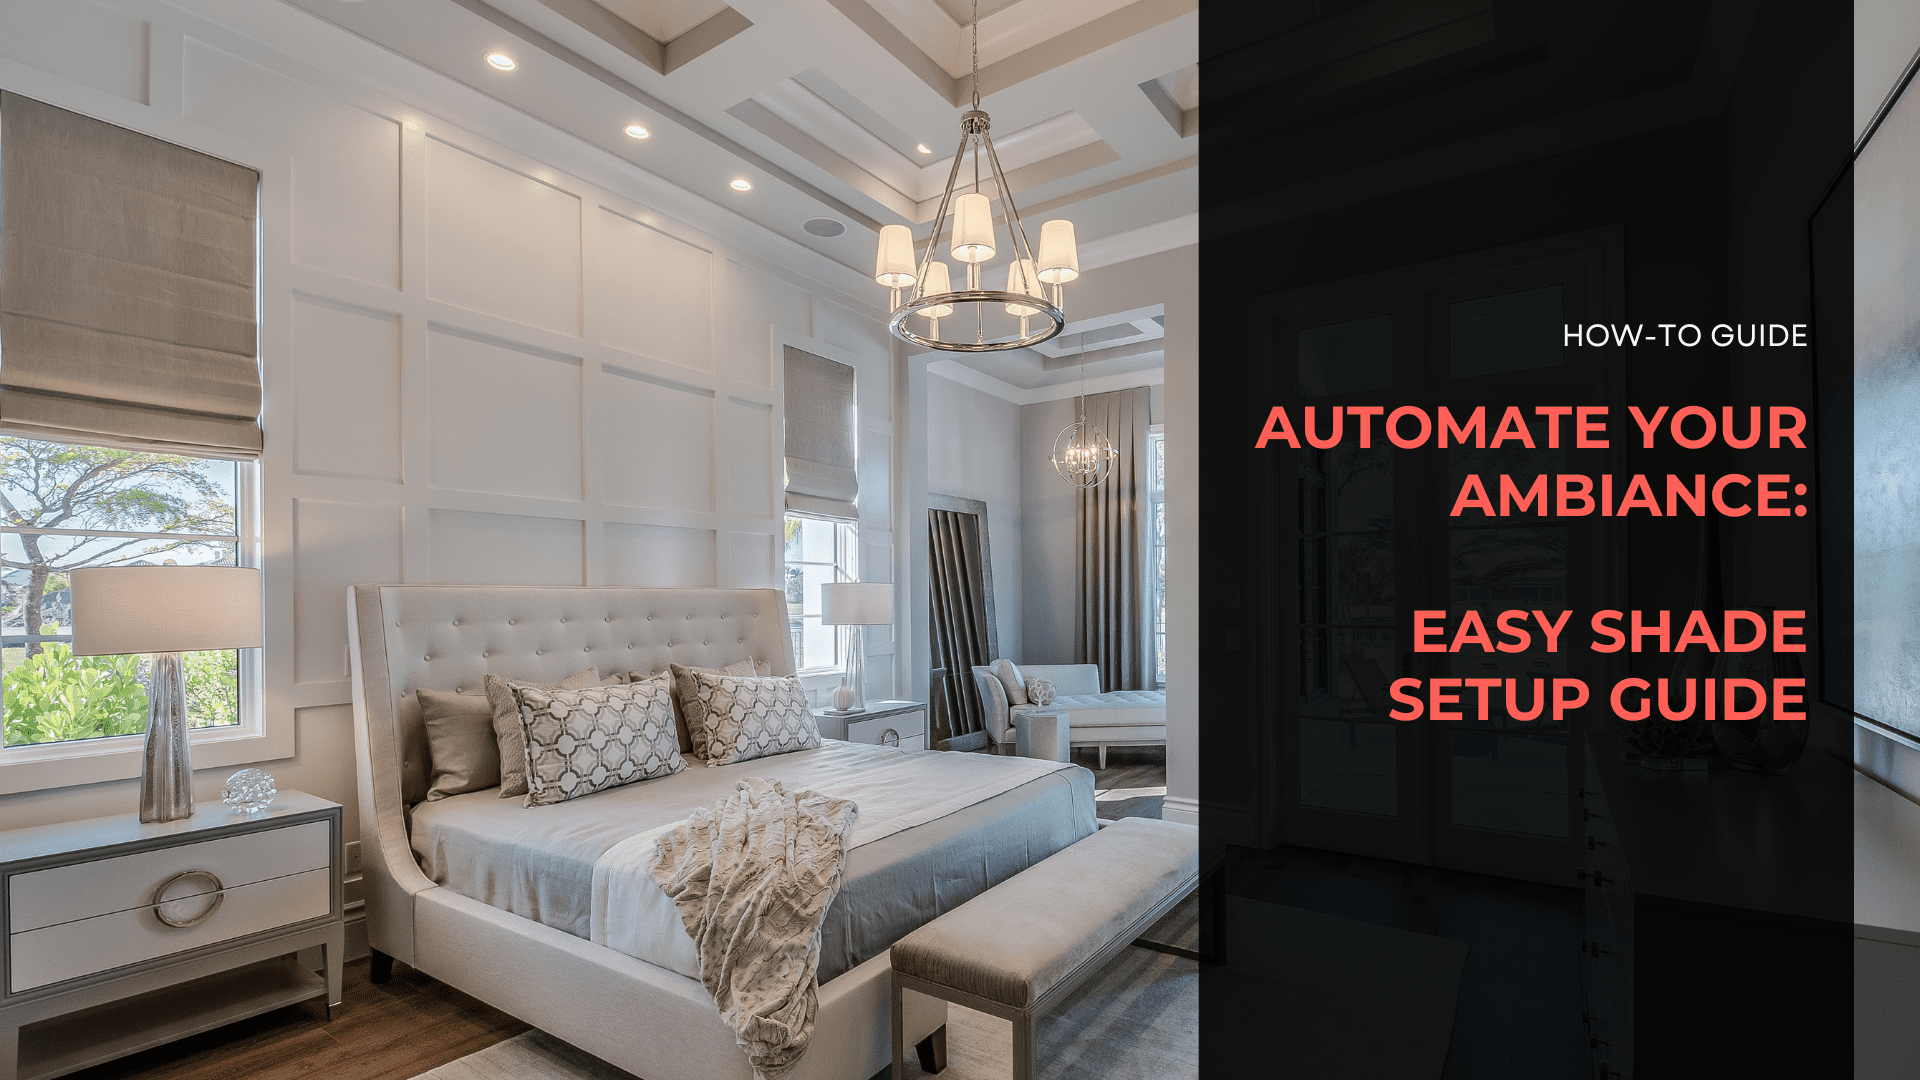 Photo of bedroom with cozy aesthetics. Image text conveys The Ultimate Step-by-Step Guide to Configuring Automated Shades for Smart Home Mastery